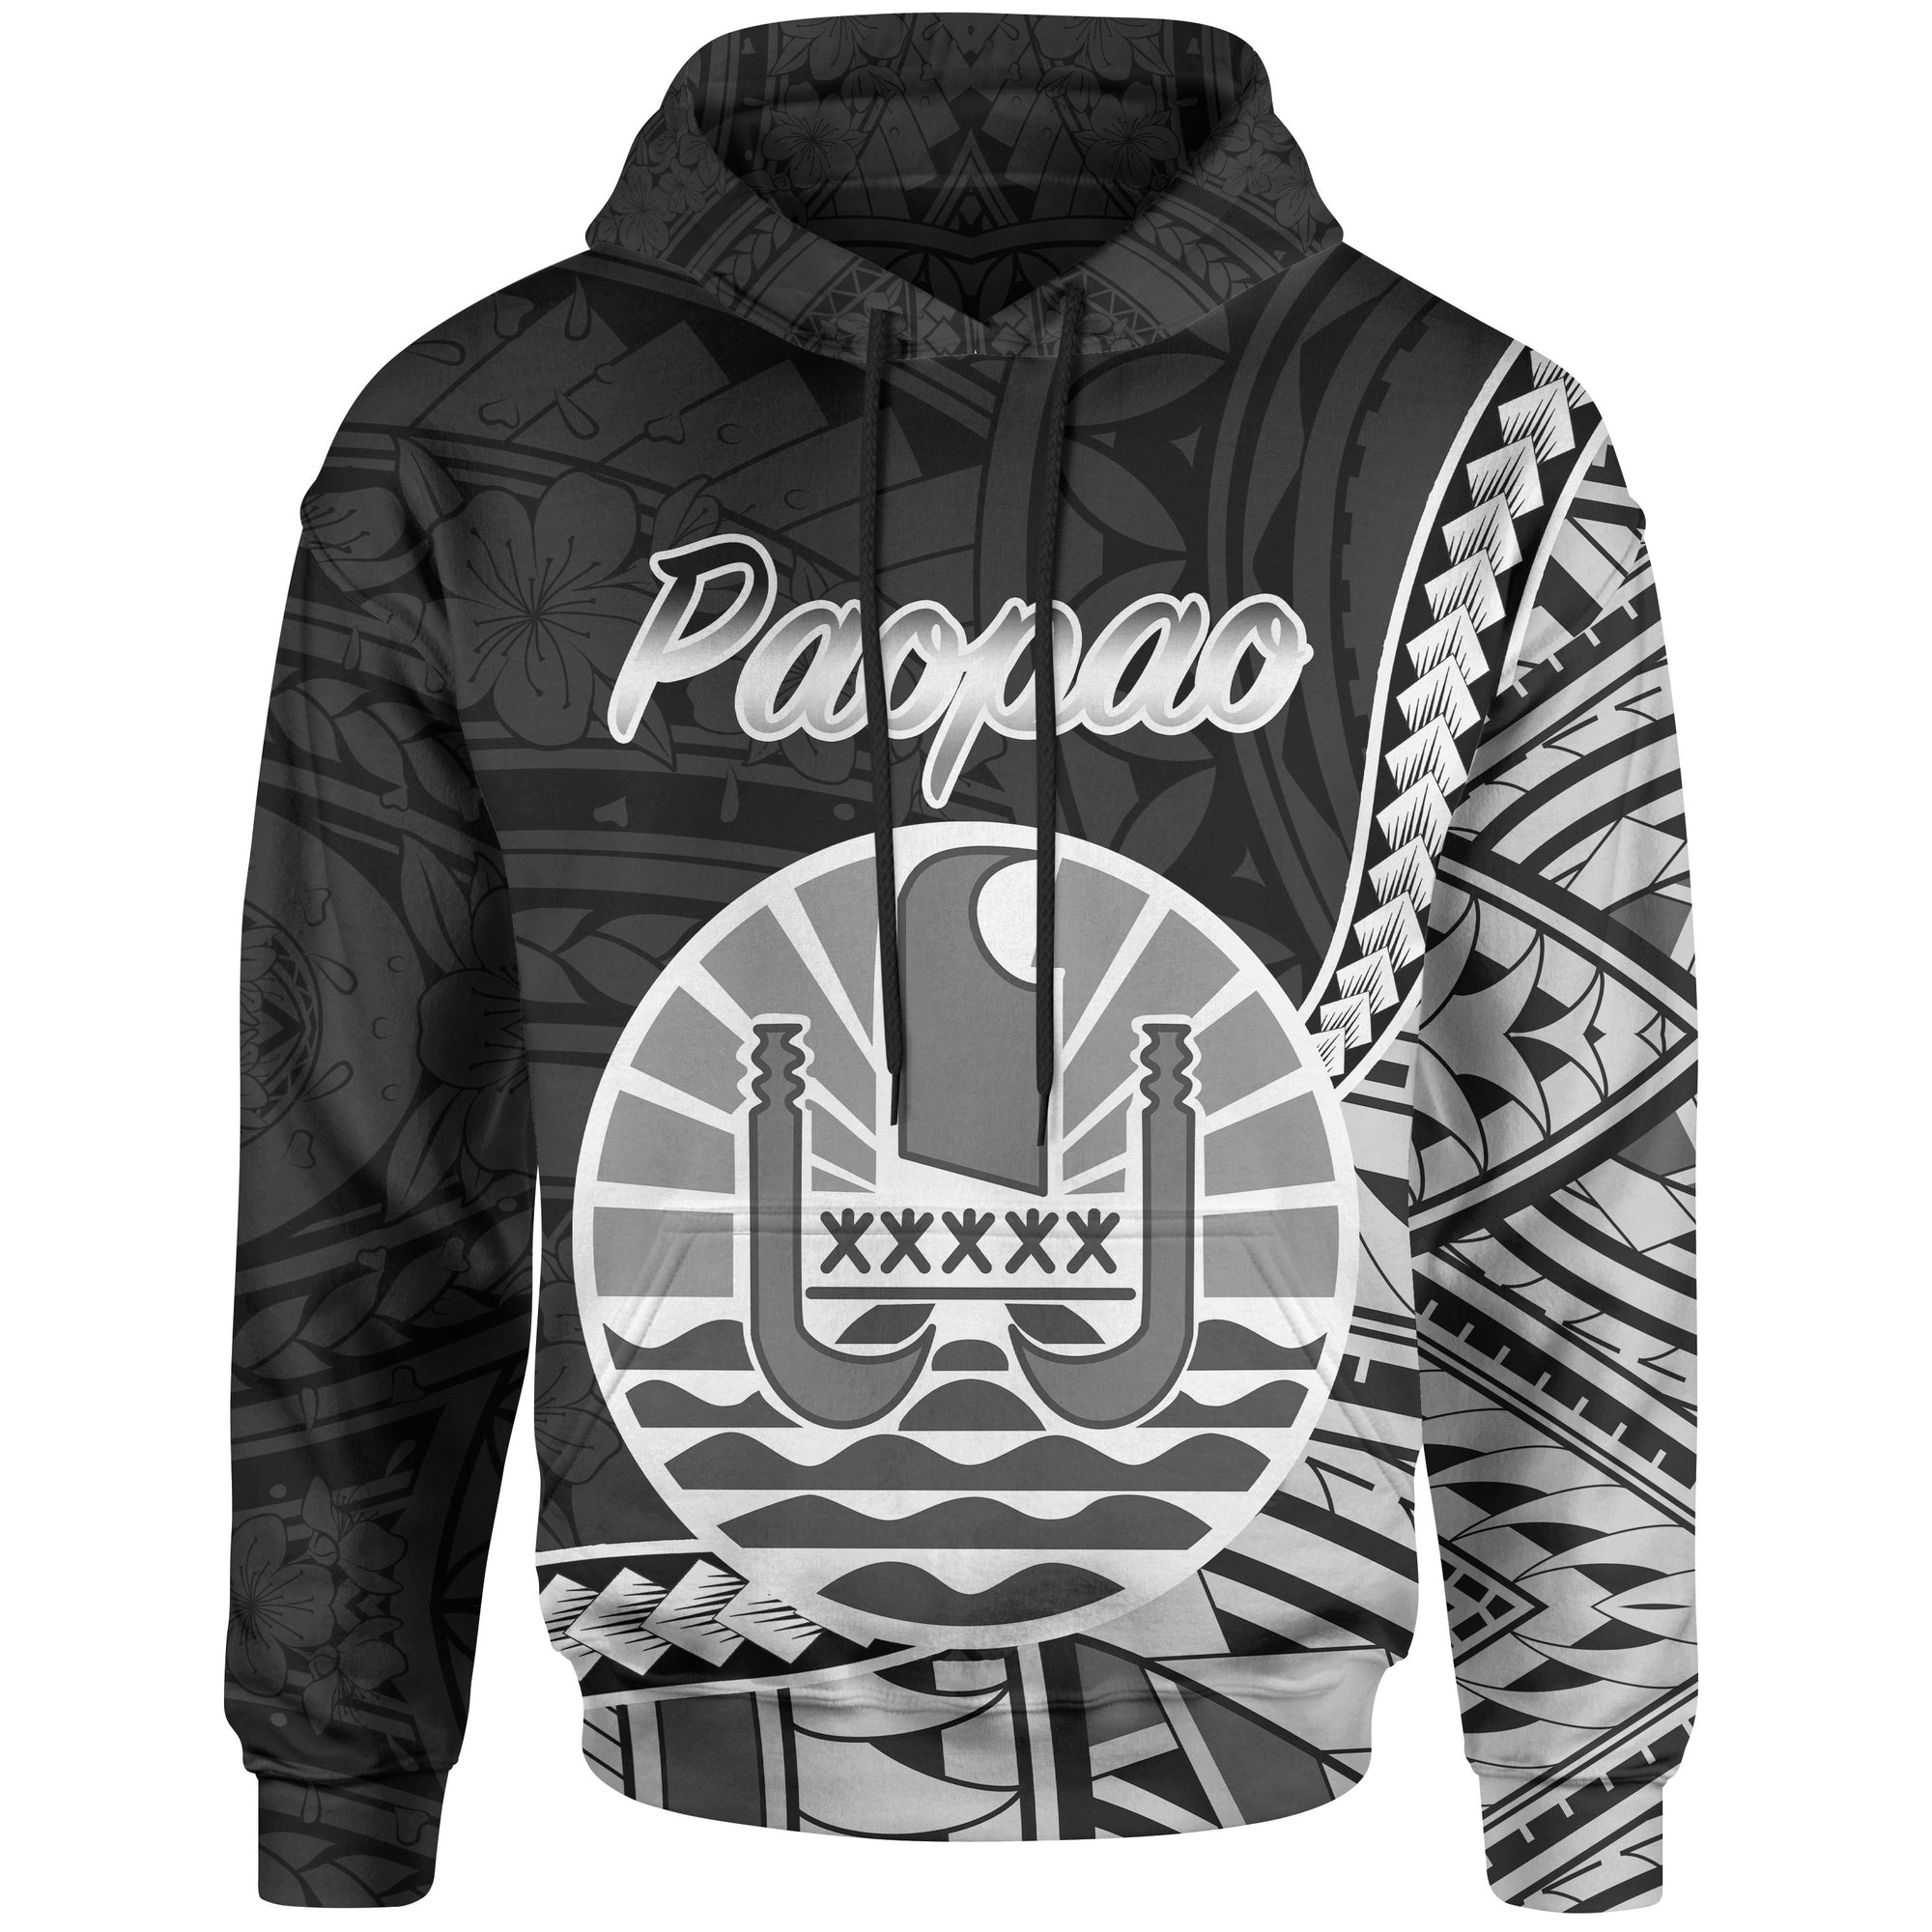 French Polynesia Hoodie Paopao Seal of French Polynesia Polynesian Patterns Unisex Black - Polynesian Pride